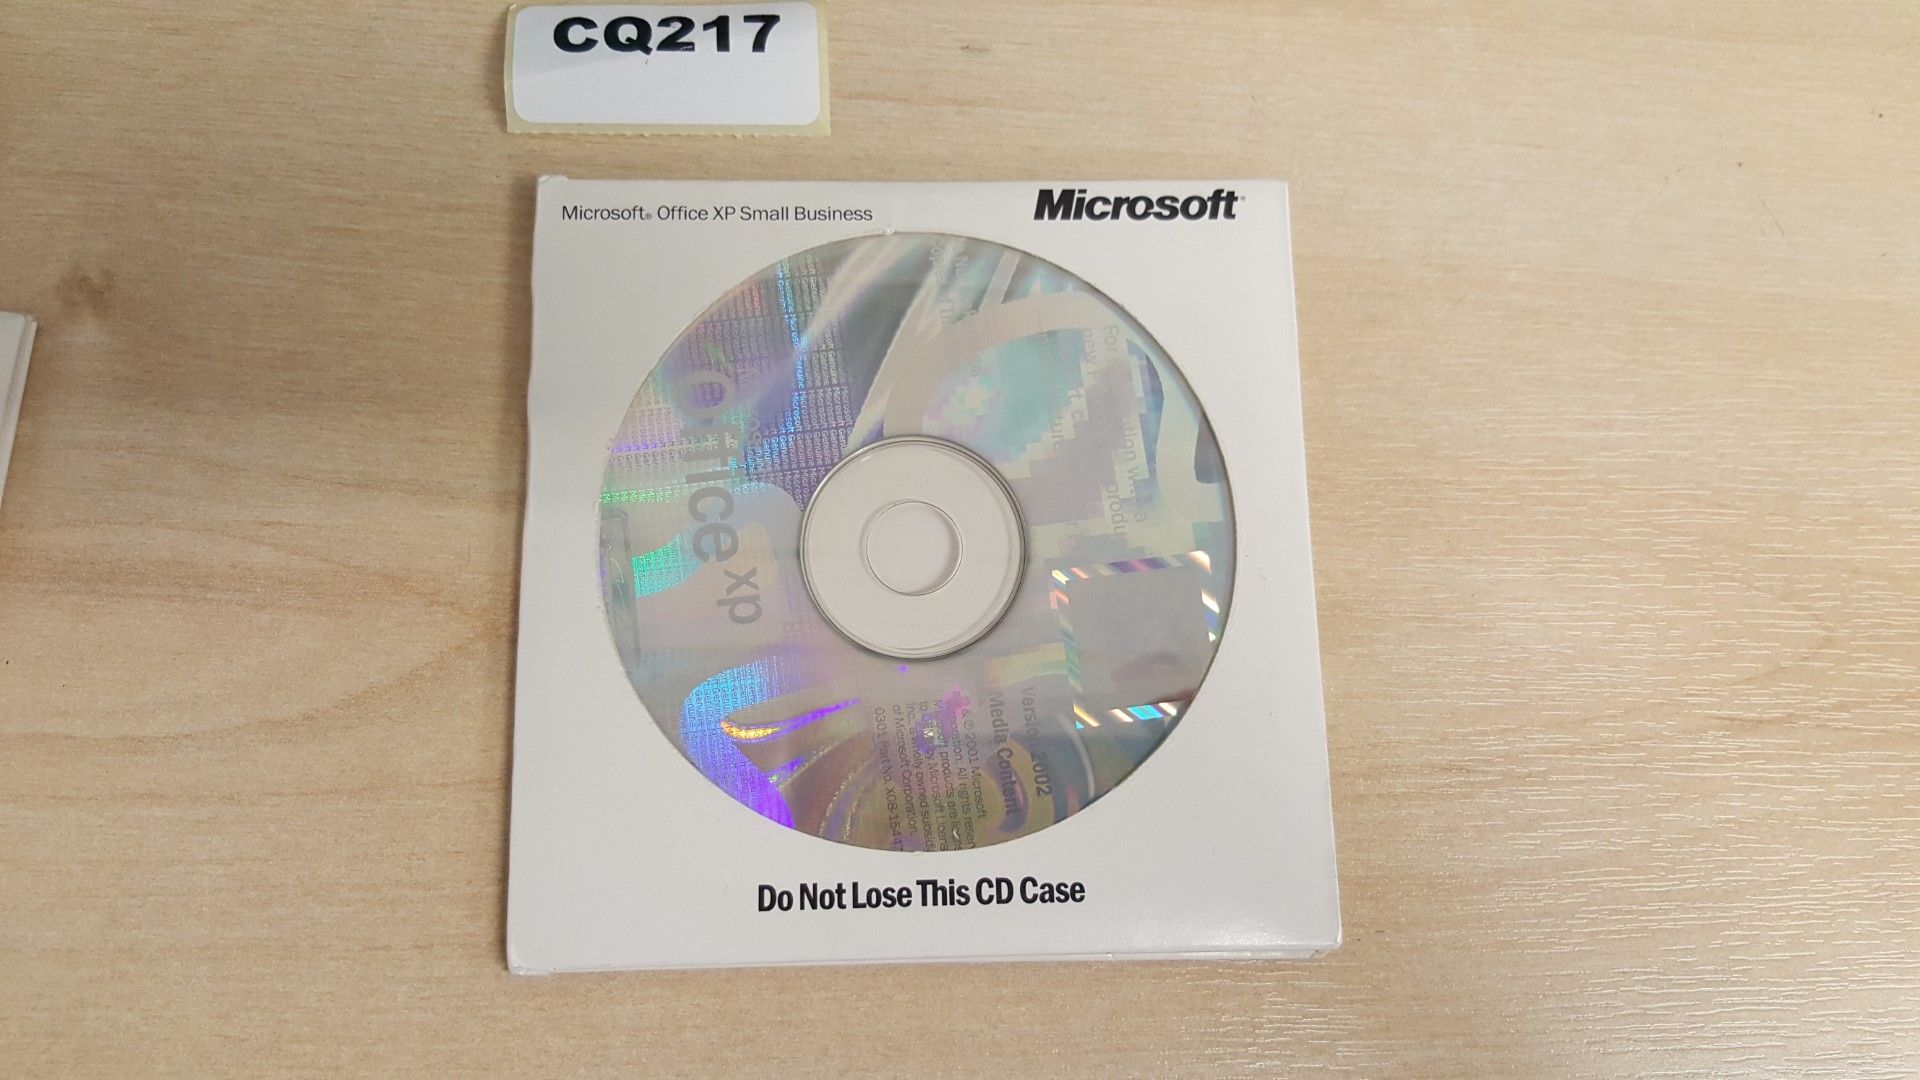 4 x Microsoft Office XP Small Business Discs - Ref CQ217 - Image 2 of 2